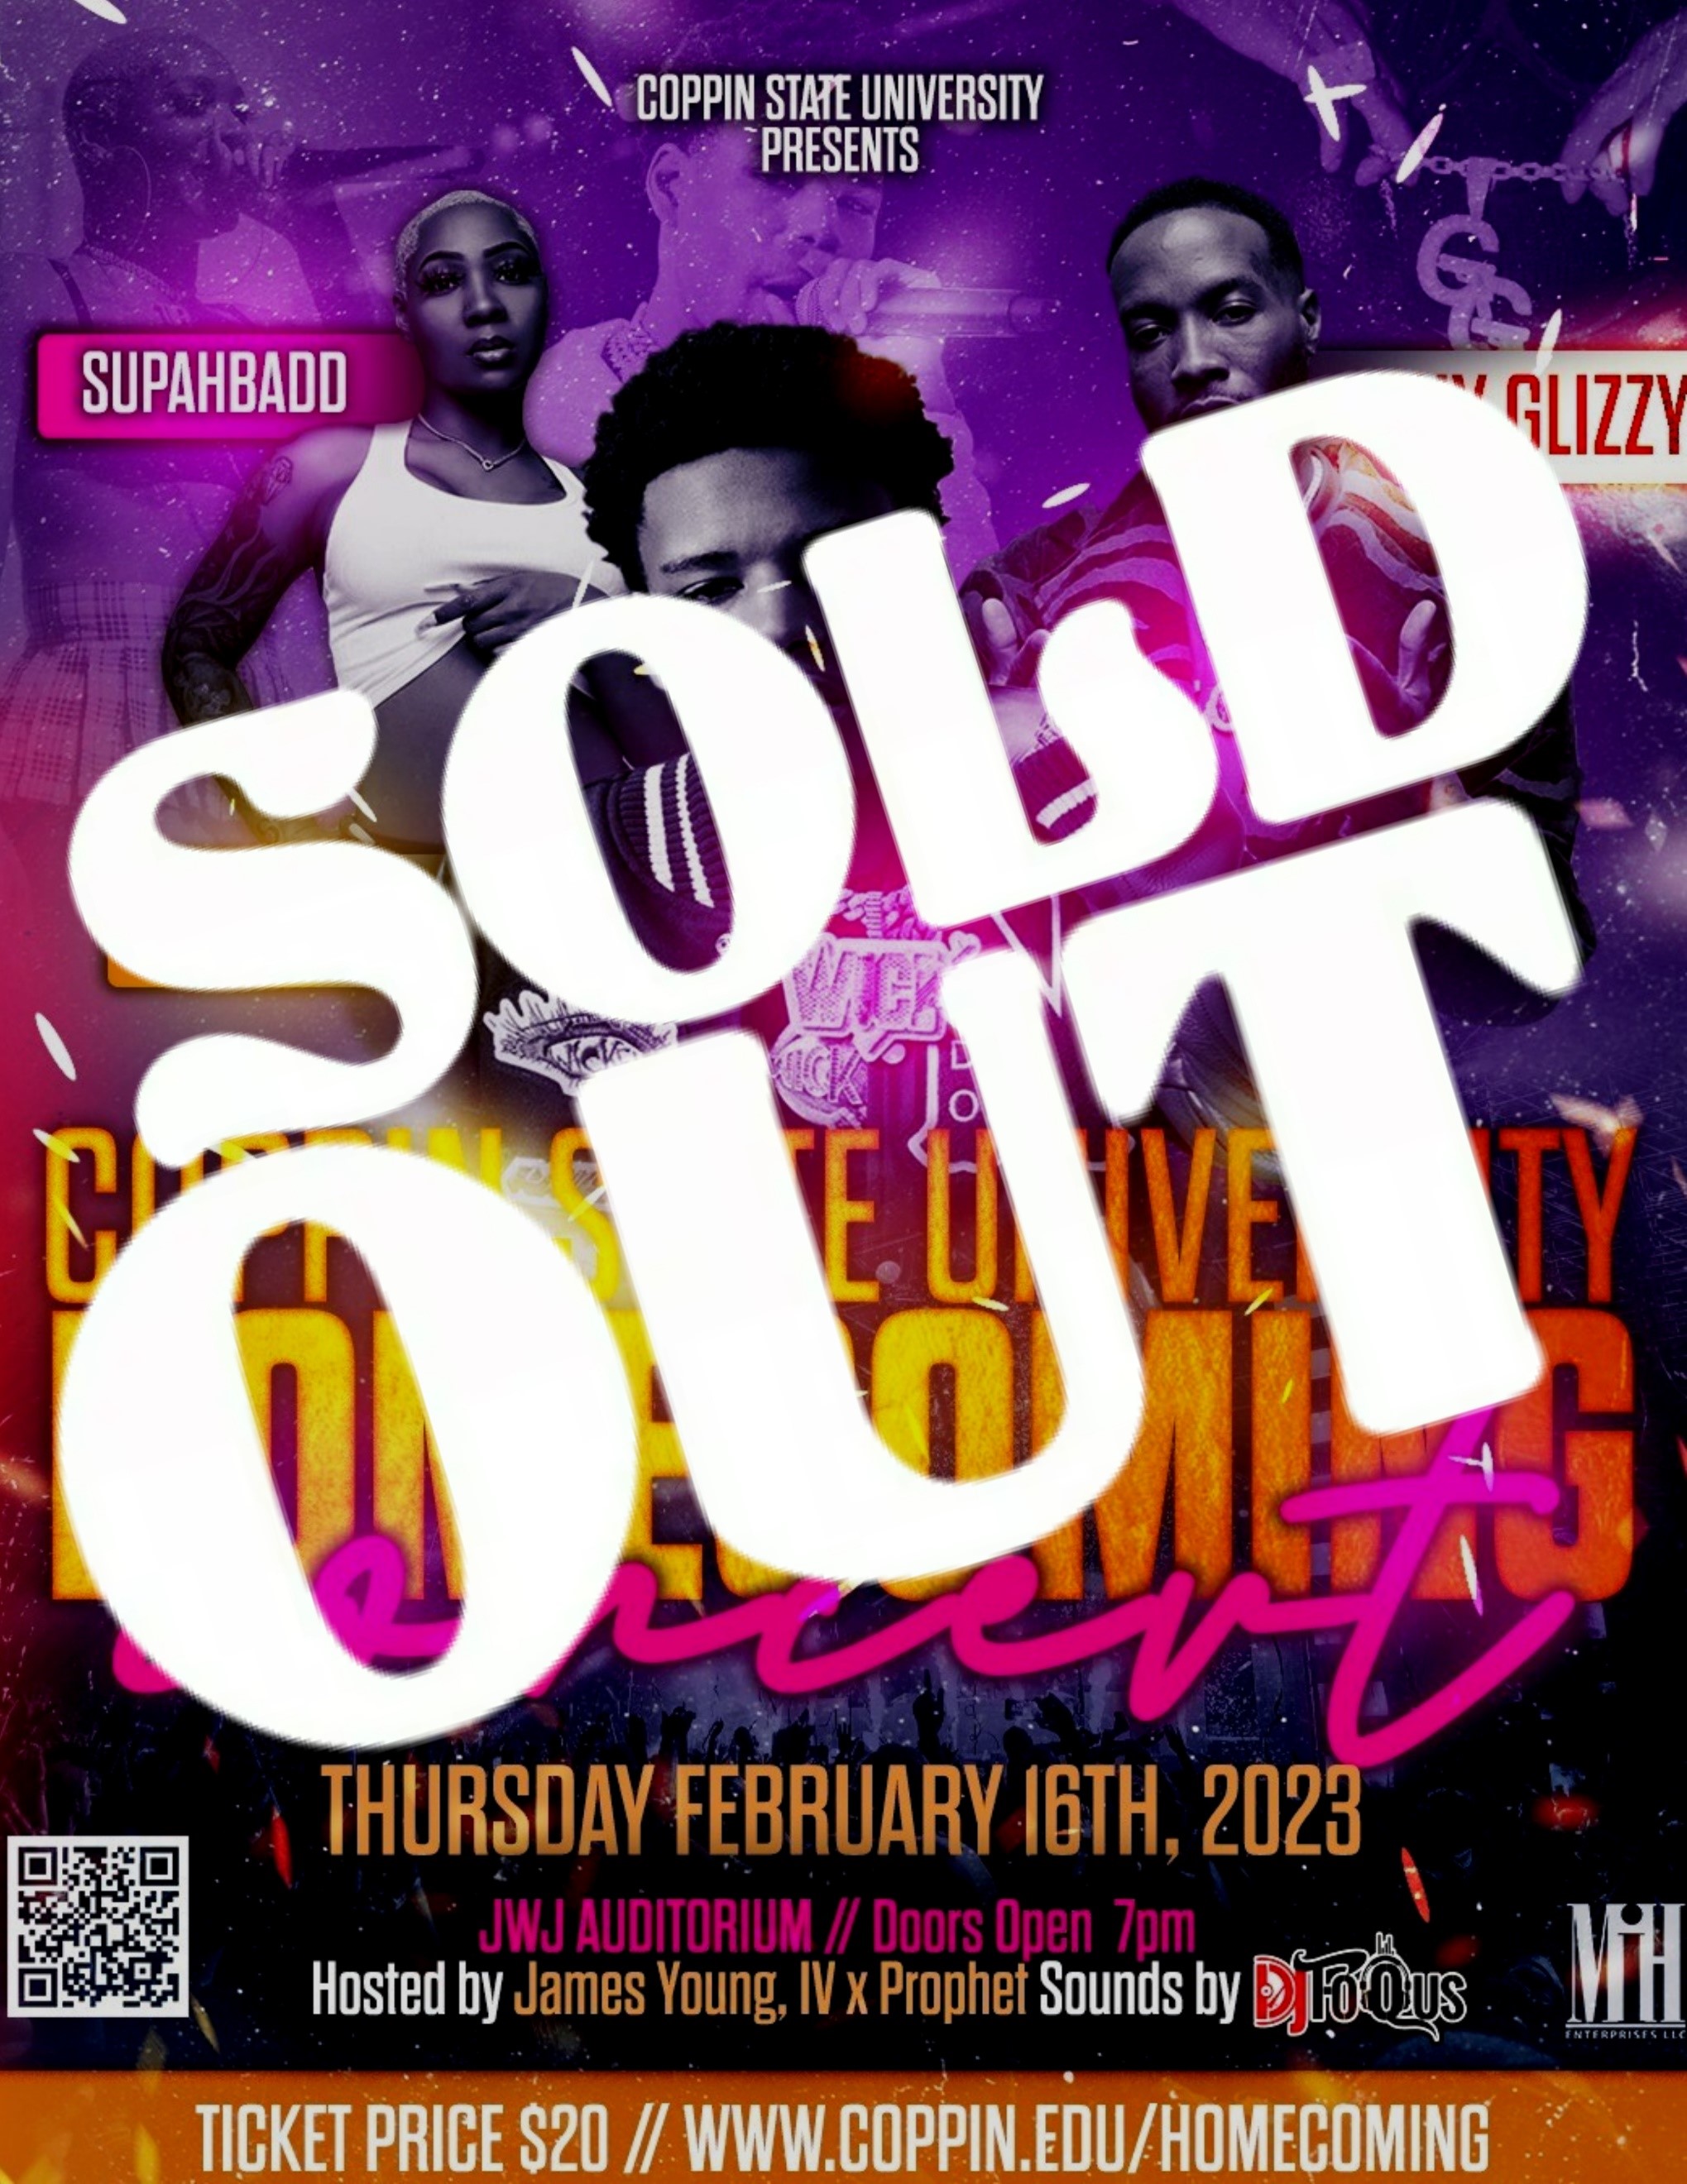 sold out! Concert Feb. 16, 2023 at 7 p.m. in JWJ auditorium. featuring Supahbadd, Nardo Wick, and Shy Glizzy. Tickets $20